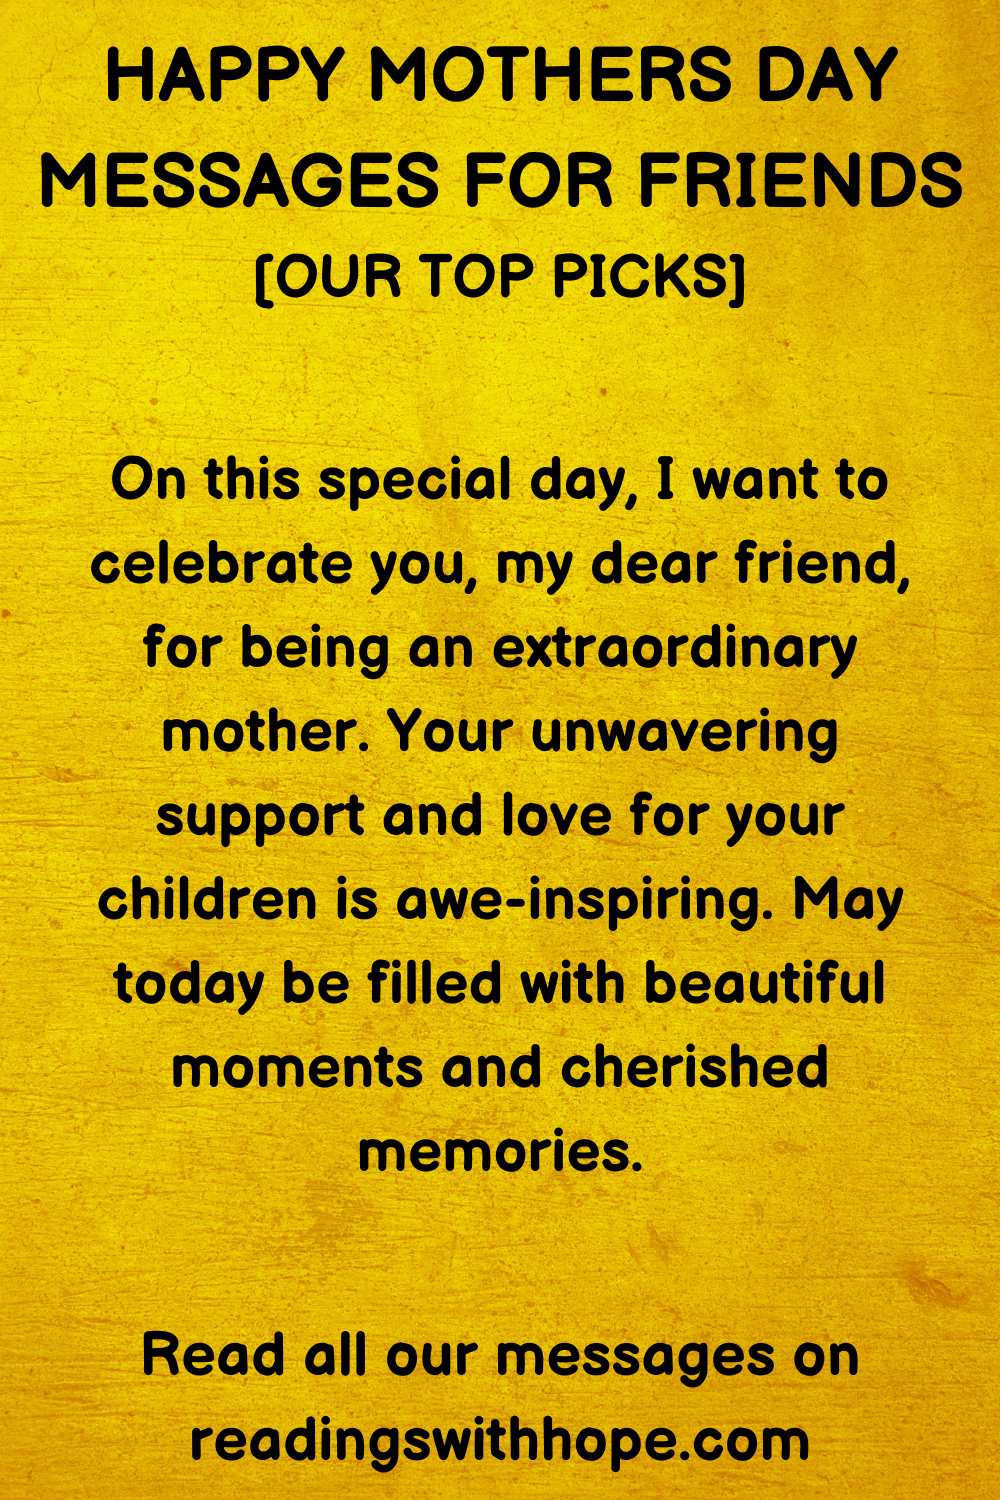 Happy Mothers Day Message for your Friend
